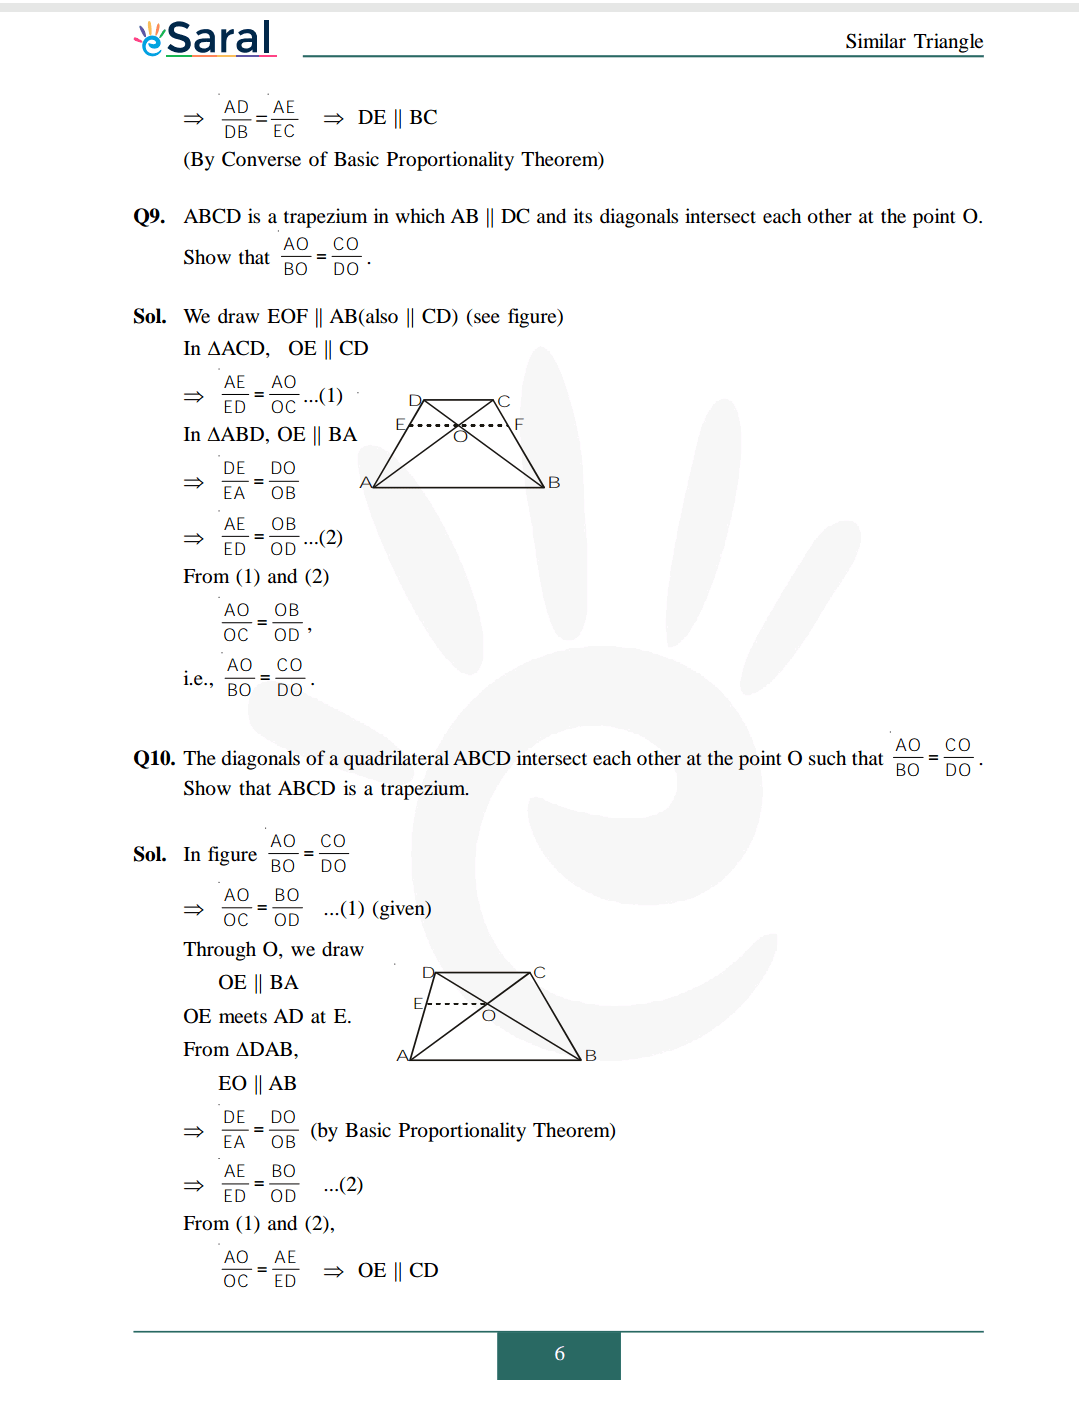 Class 10 Maths Chapter 6 exercise 6.2 solutions Image 5